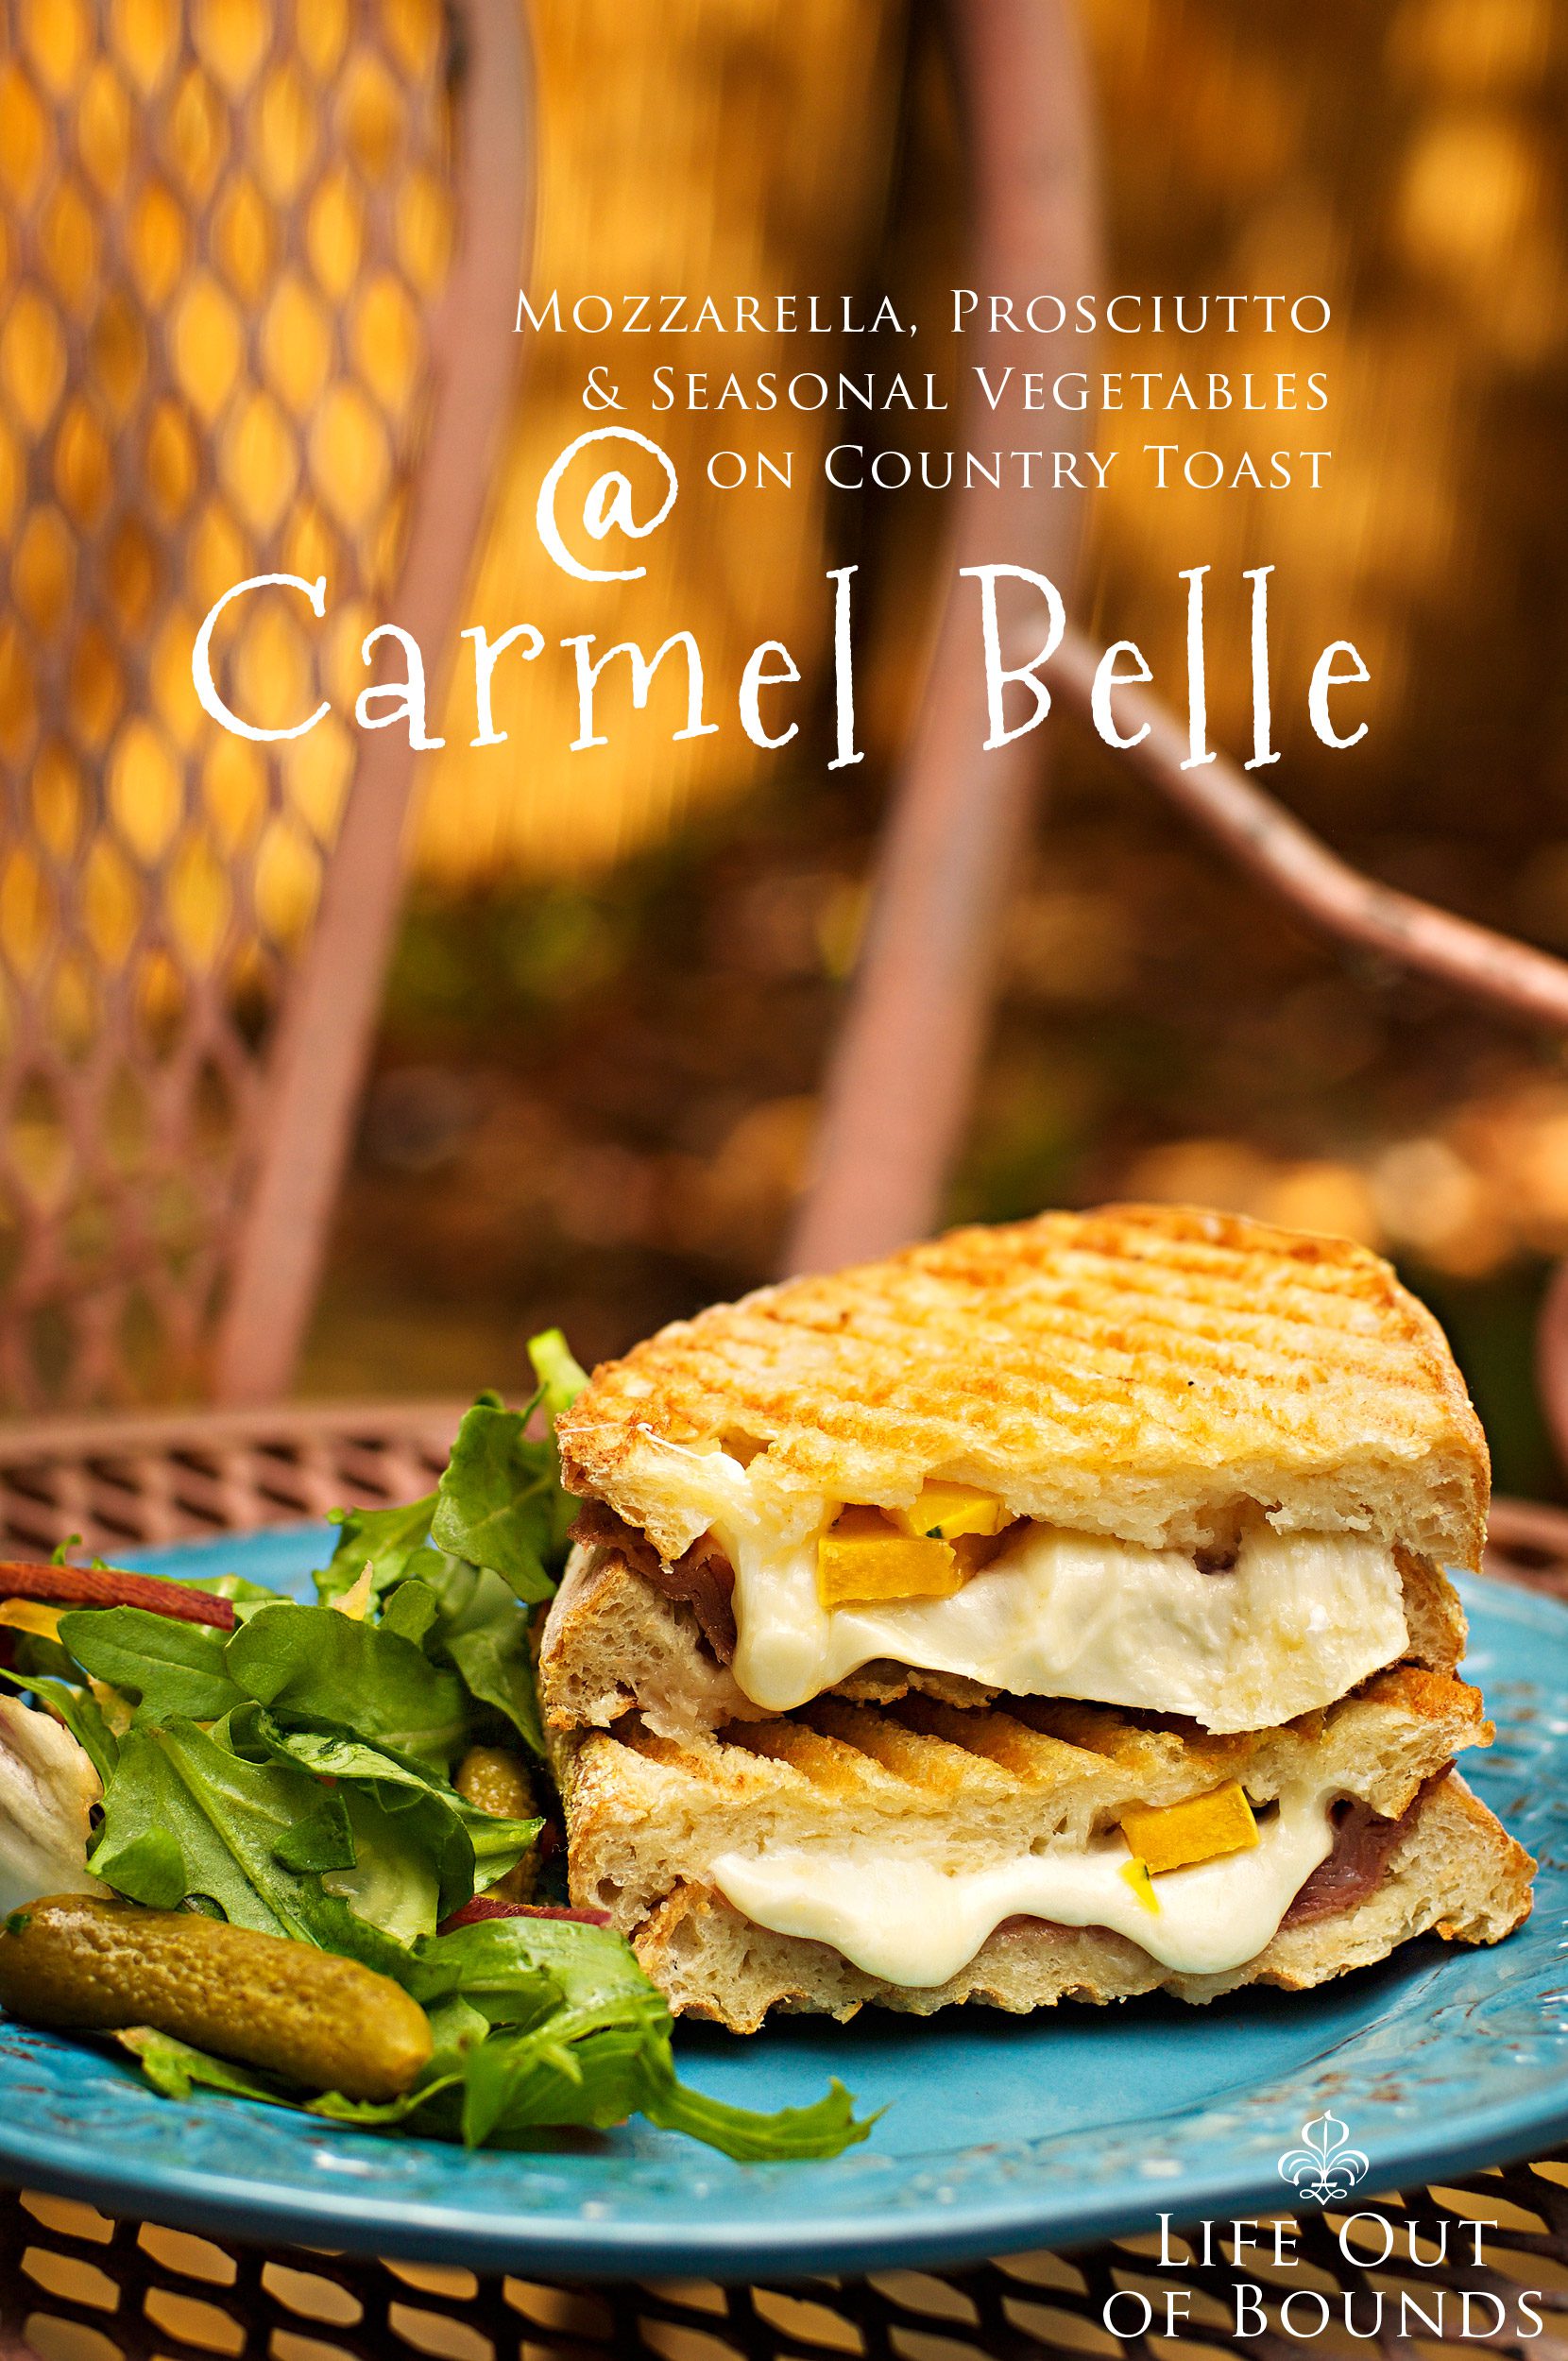 Mozzarella-prosciutto-and-season-vegetable-grilled-sandwich-by-Carmel-Belle-cafe-in-Carmel-by-the-Sea-California